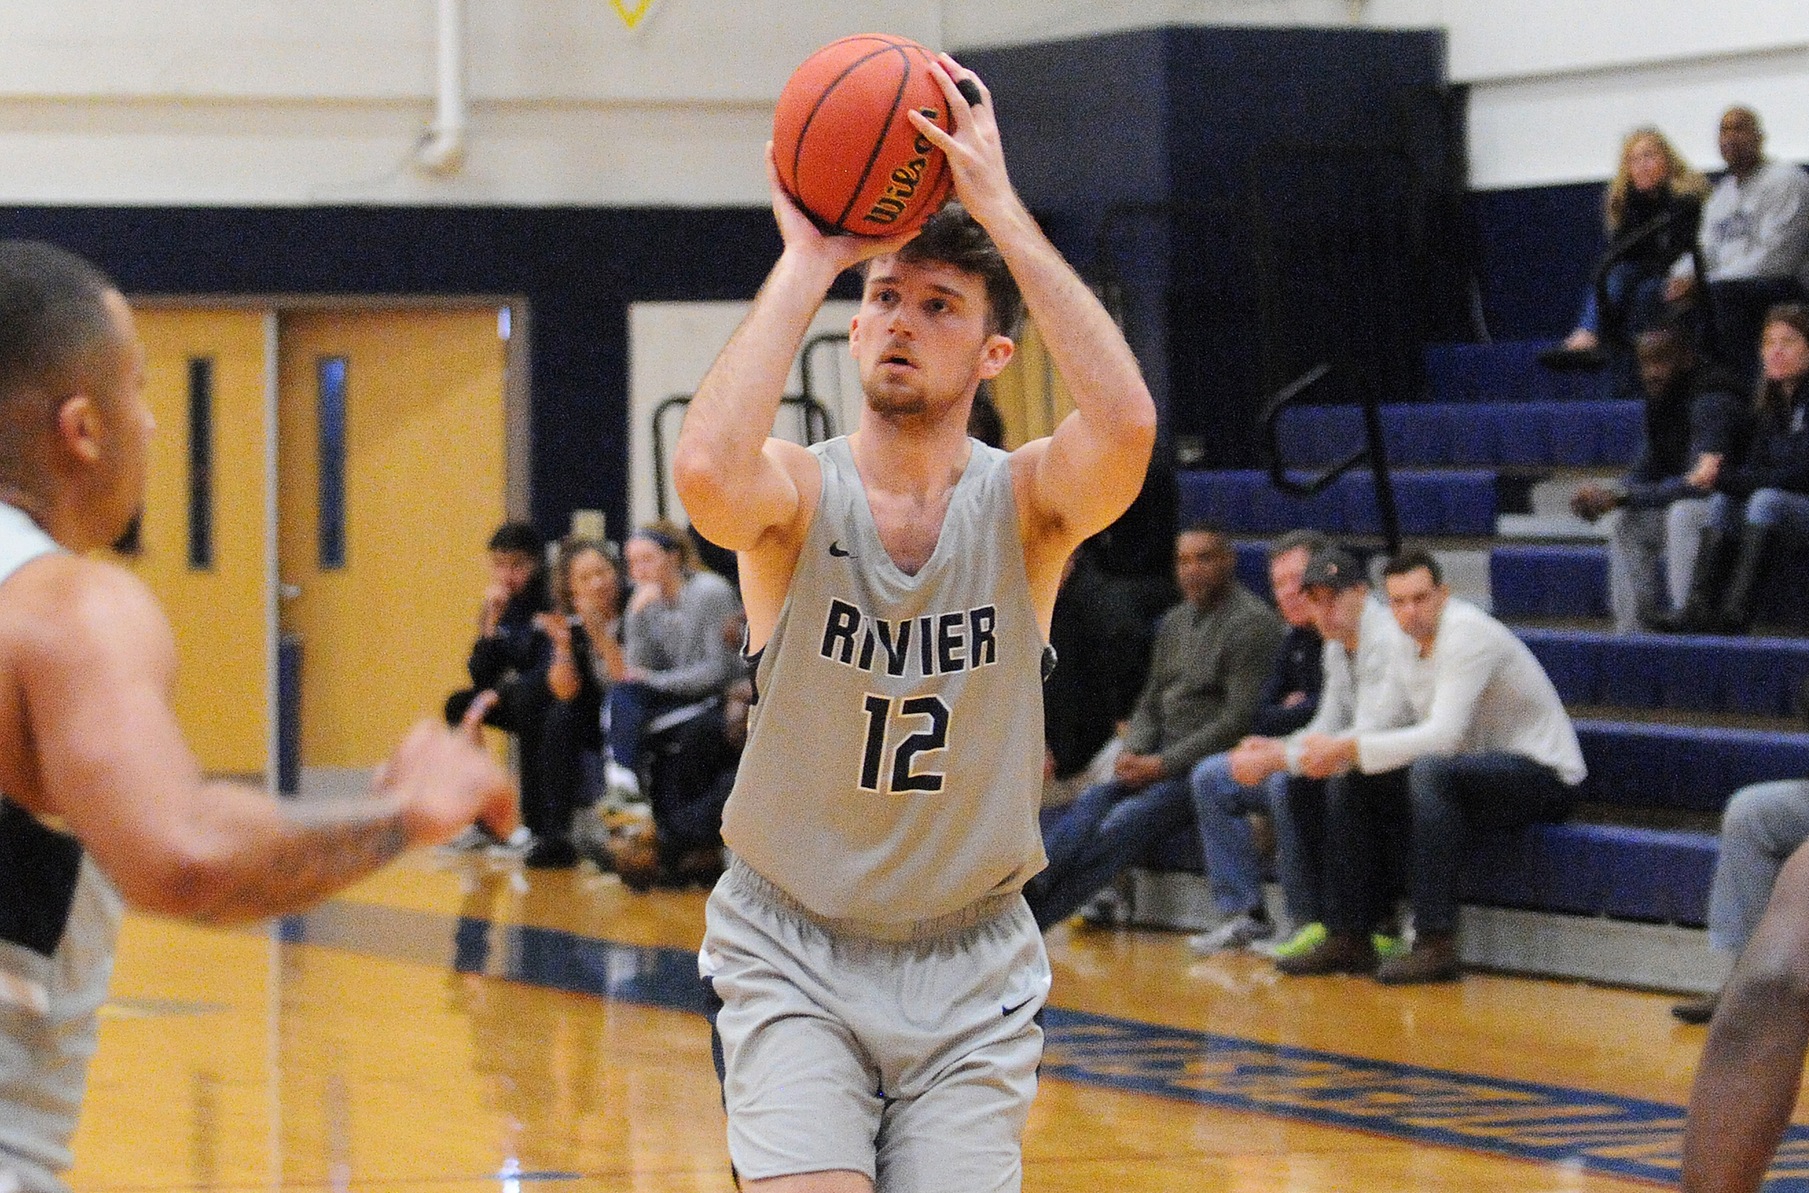 Men's Basketball: Raiders come up short to Saint Joseph's in Catholic Colleges Classic